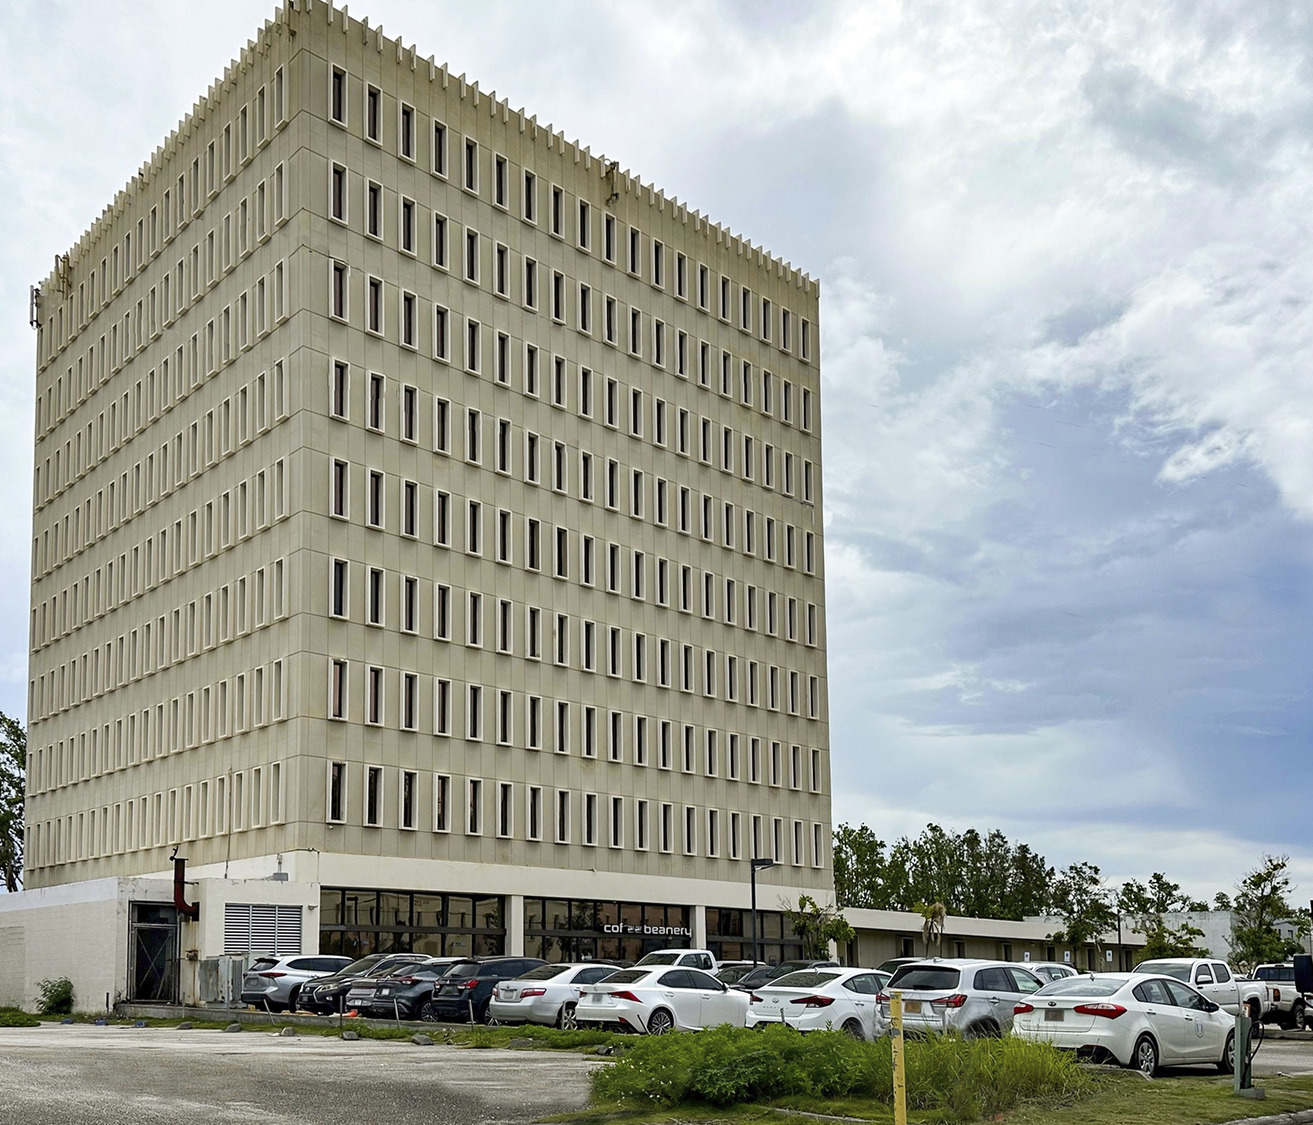 An exterior view of the Guam office building.